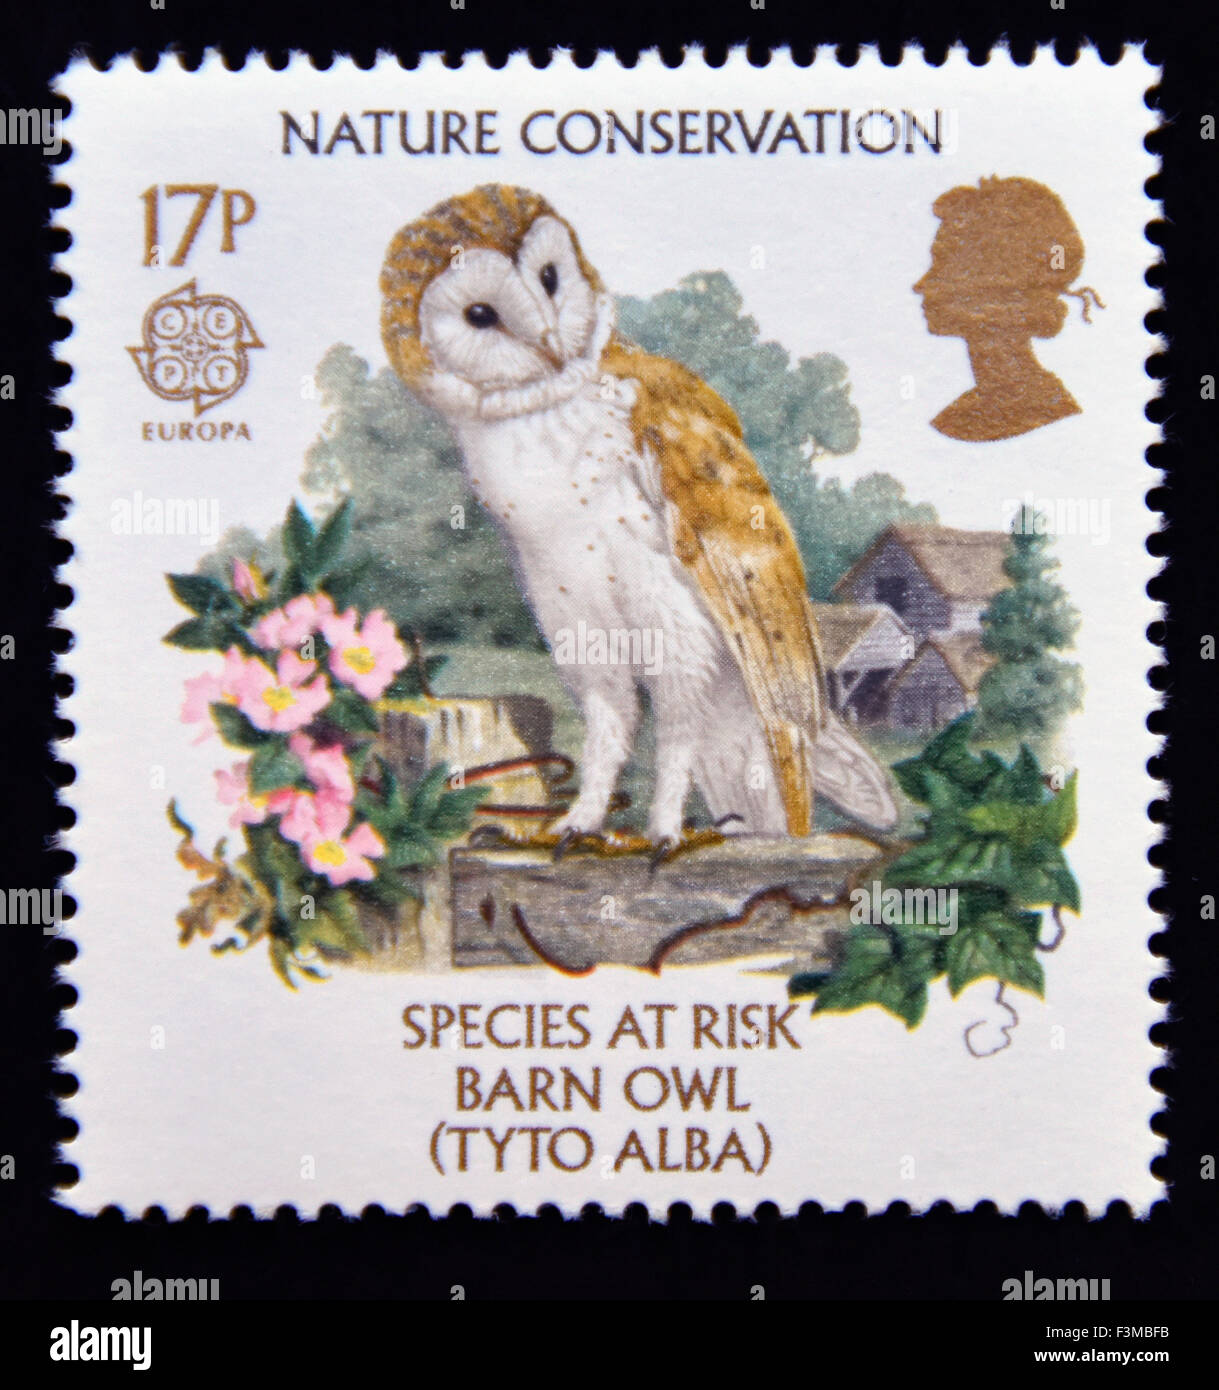 Postage stamp. Great Britain. Queen Elizabeth II. 1986. Europa Nature Conservation. Species at Risk. Barn Owl. 17p. Stock Photo